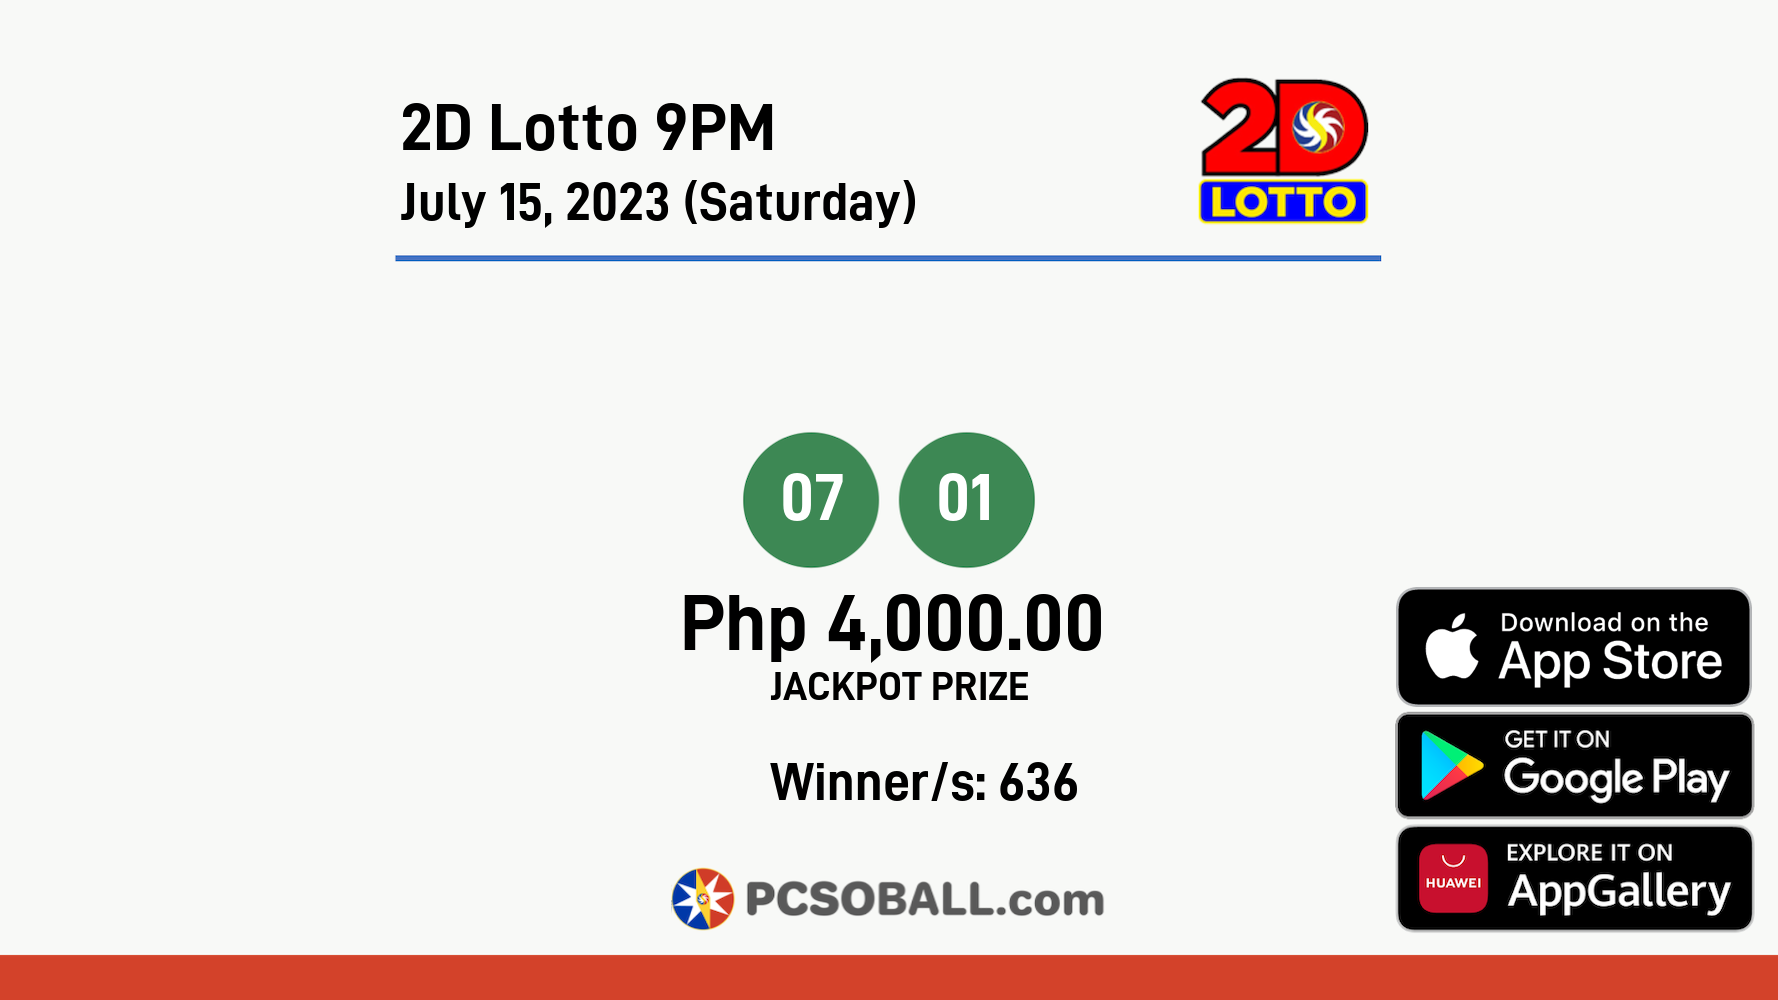 2D Lotto 9PM July 15, 2023 (Saturday) Result